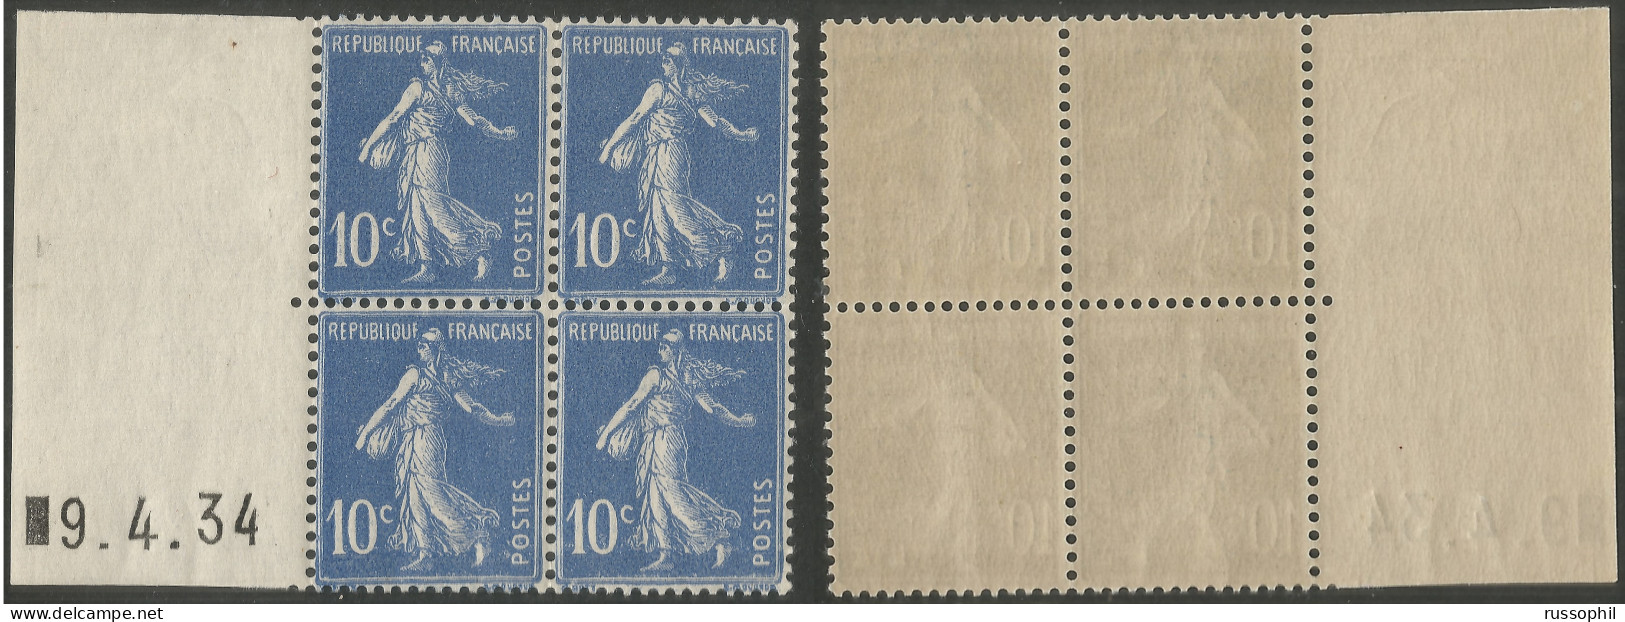 FRANCE - ROULETTE - Yv  #279 - BLOC DE 4 COIN DATE A GAUCHE 9.4.34 (**) - ROLLER BLOCK OF 4 LEFT DATED 9.4.34 (MNH) - Coil Stamps